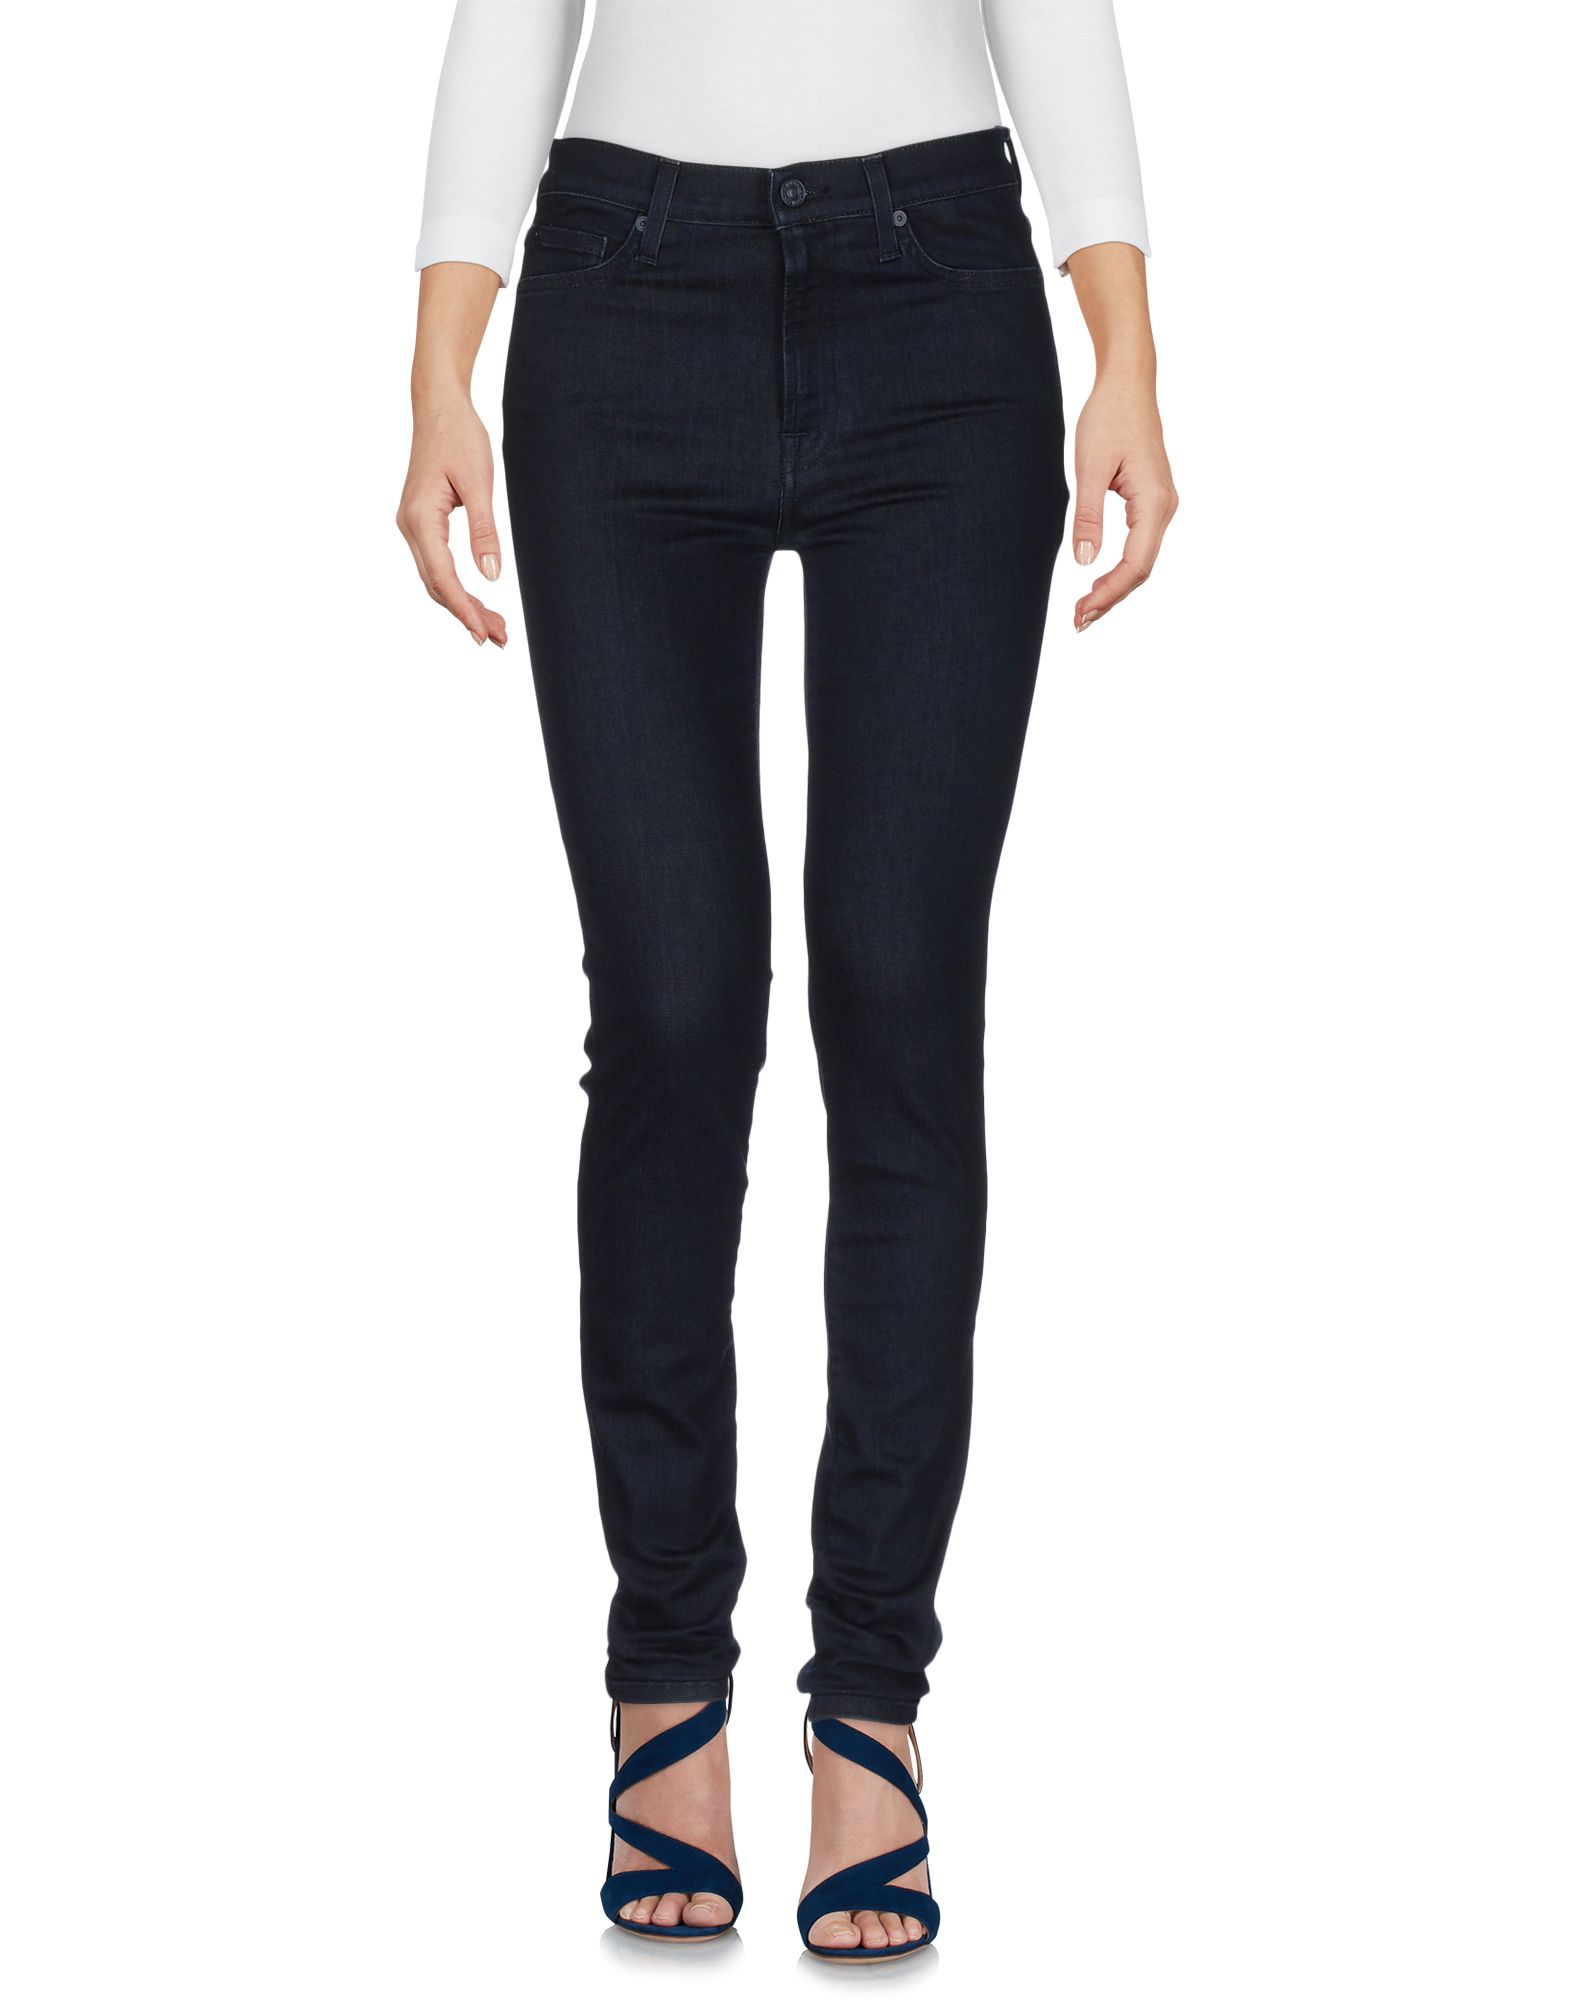 7 FOR ALL MANKIND Denim pants,42586719LH 2